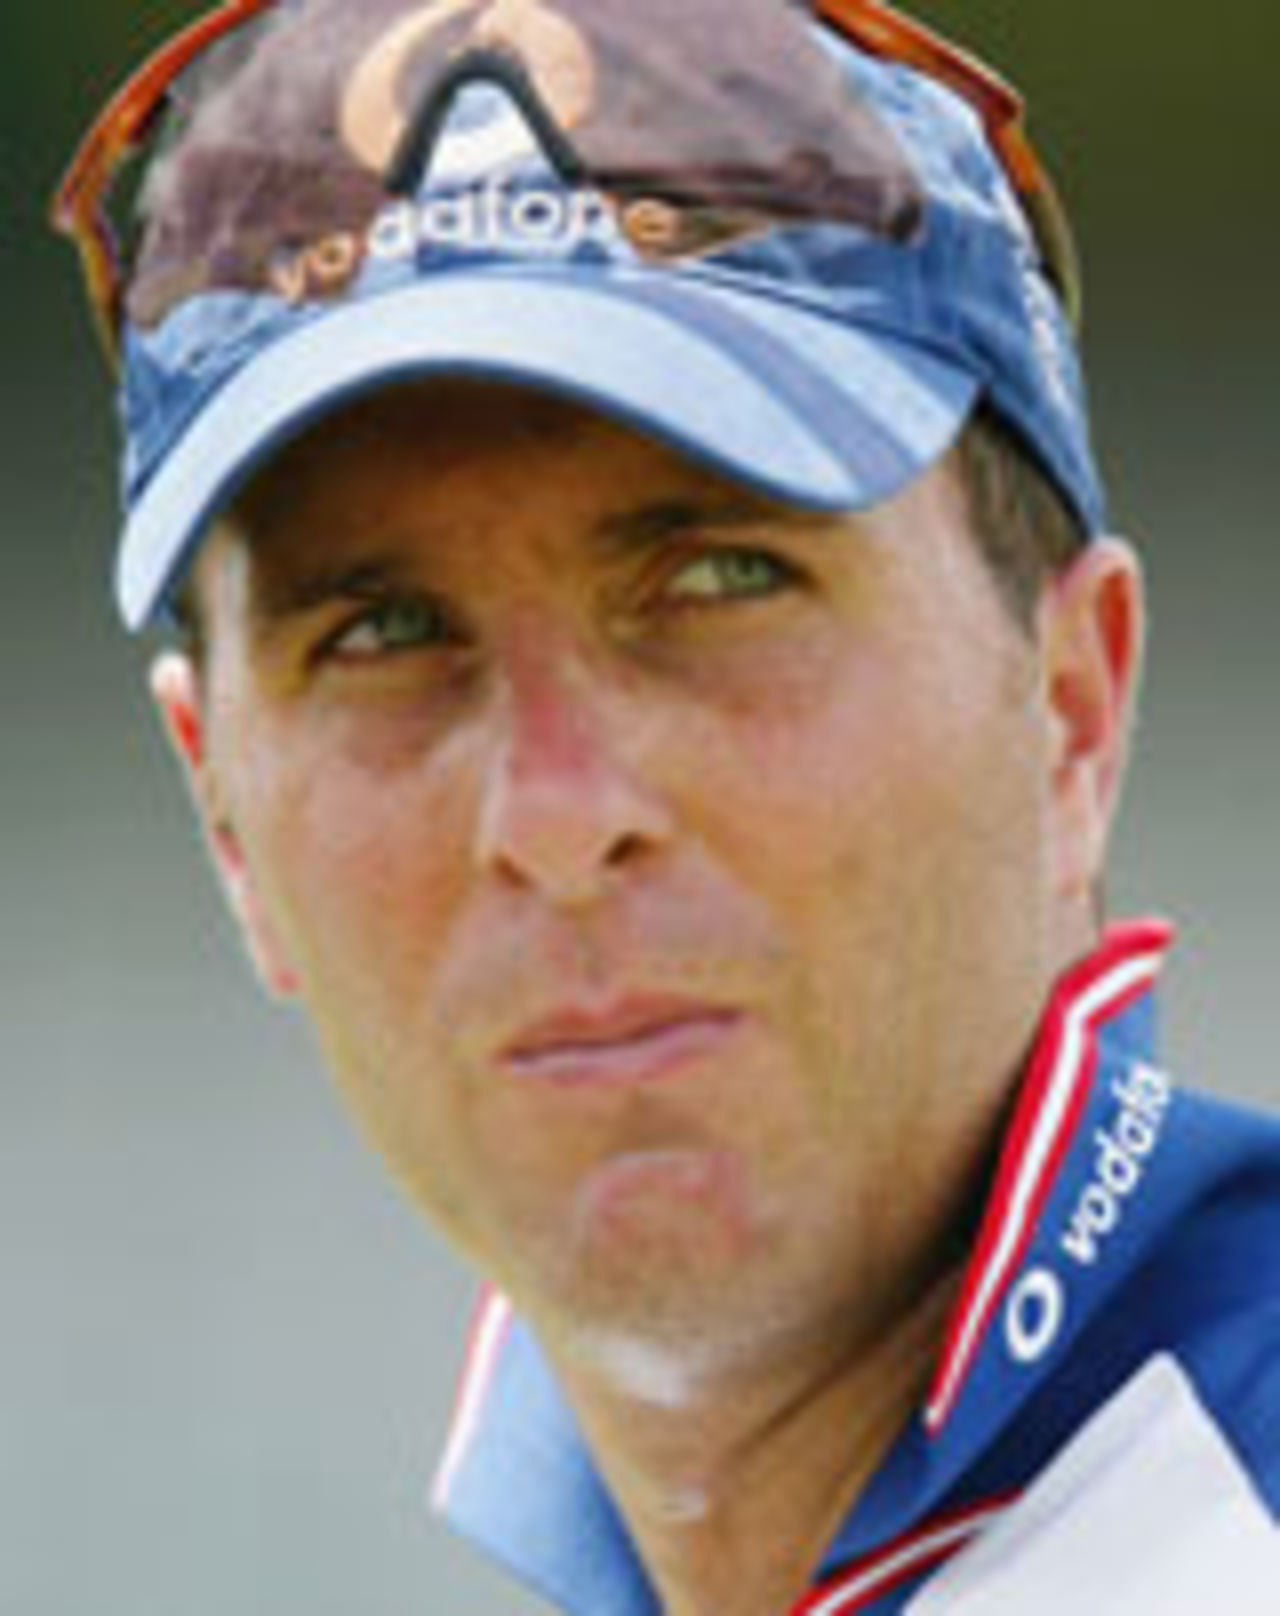 Michael Vaughan looks on in a practice session, Trinidad, April 23, 2004